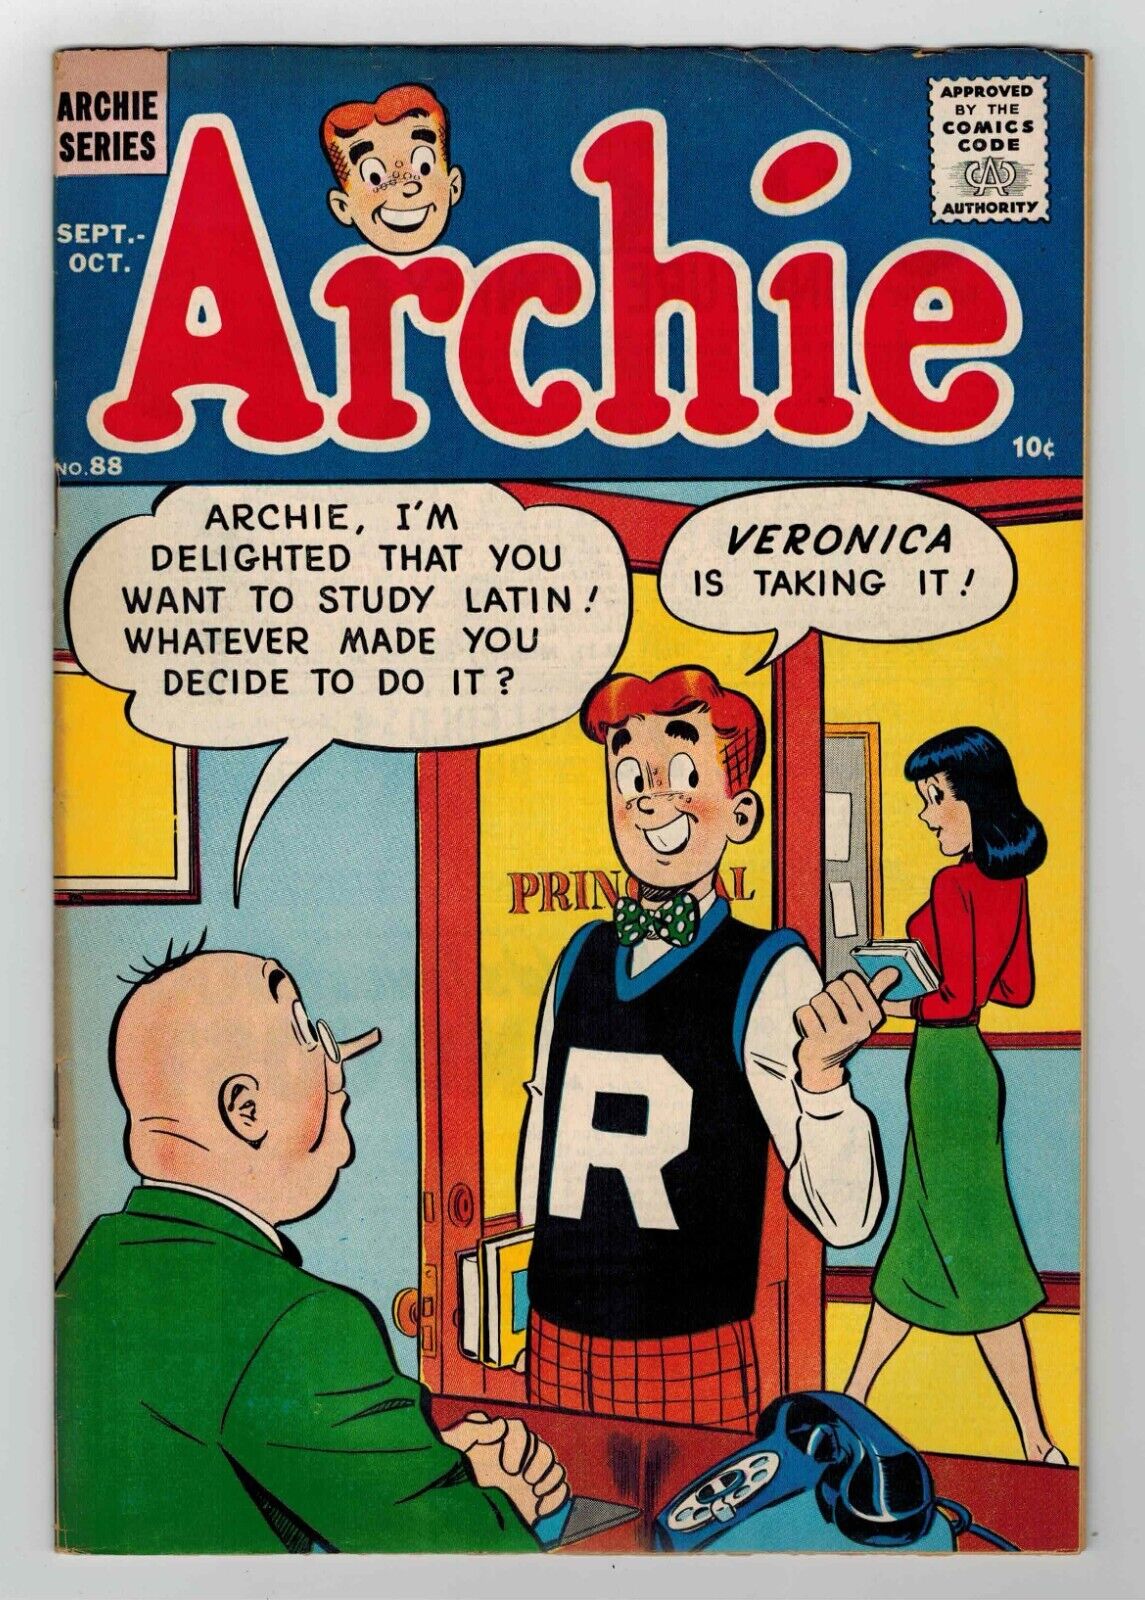 ARCHIE # 88 - (ARCHIE 1957) - NICE SOLID MID-GRADE - HARD TO FIND - FN 6.0